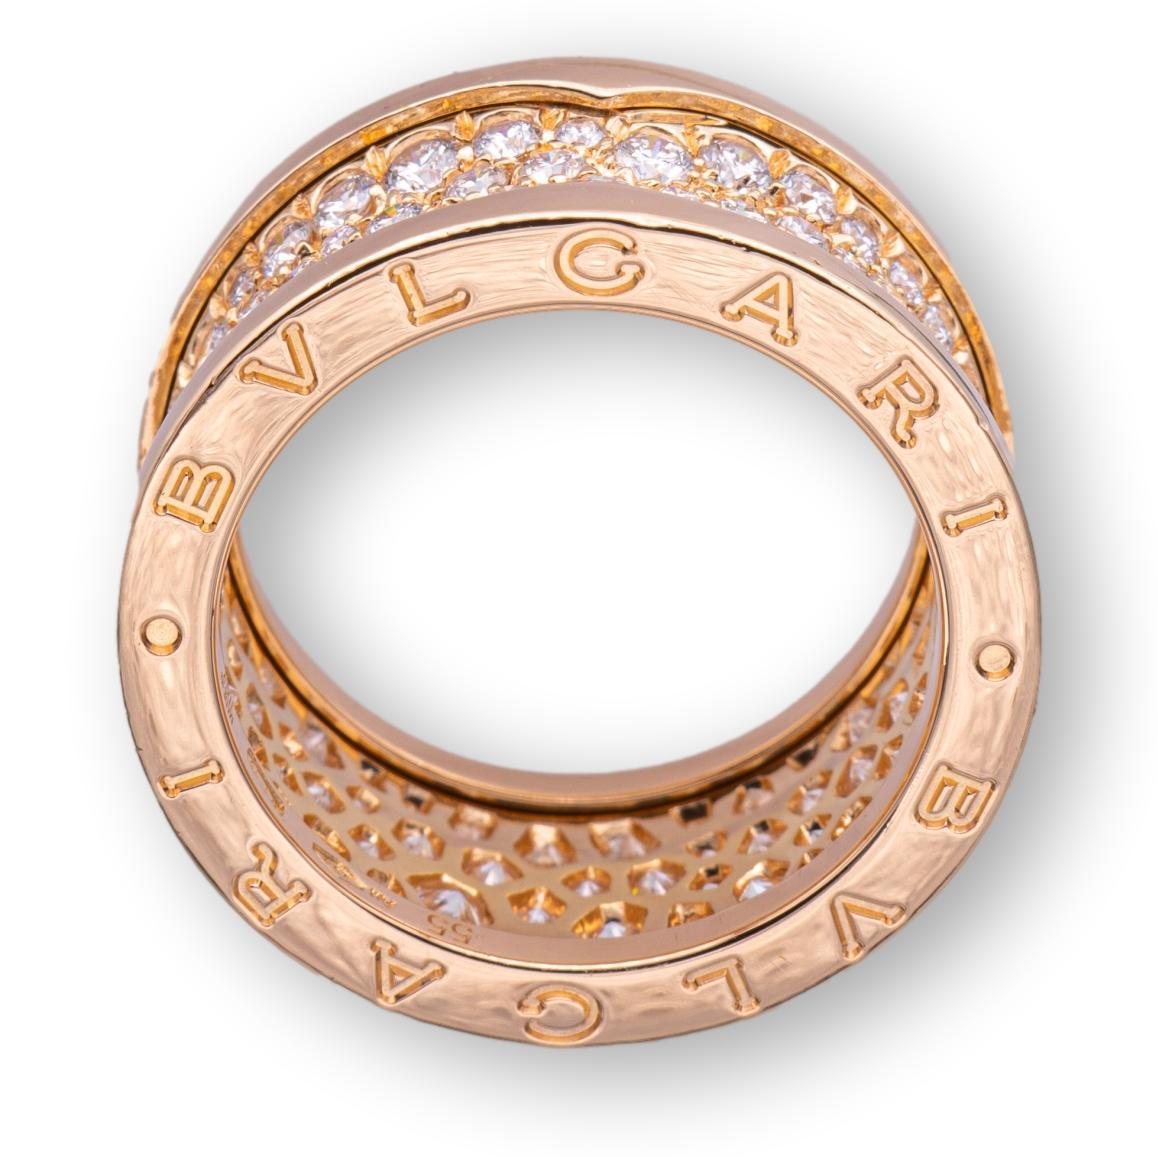 Bulgari band ring from the B-Zero1 collection finely crafted in 18 karat rose gold studded with 4 rows of bead set round brilliant cut diamonds going all the way around weighing 2.40 carats total weight approximately. Ring is fully hallmarked with